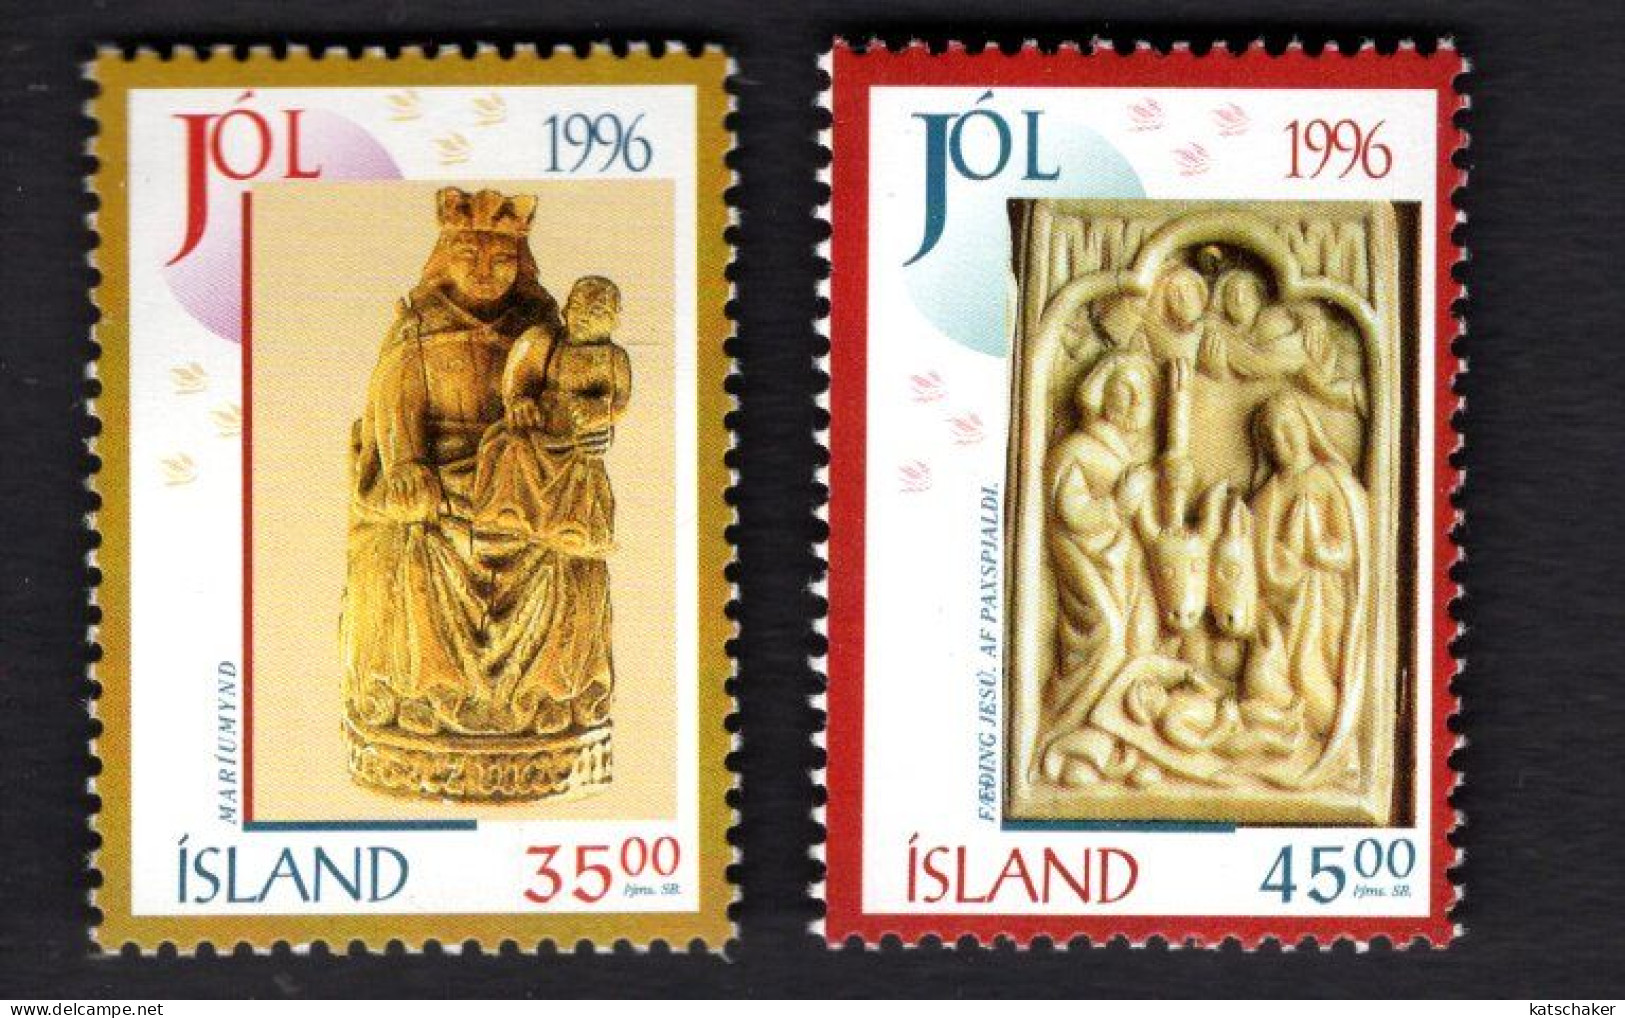 2022474959 1996 SCOTT 832 833 (XX)  POSTFRIS MINT NEVER HINGED - CHRISTMAS - ARTIFACTS FROM NATL MUSEUM OF ICELAND - Nuevos